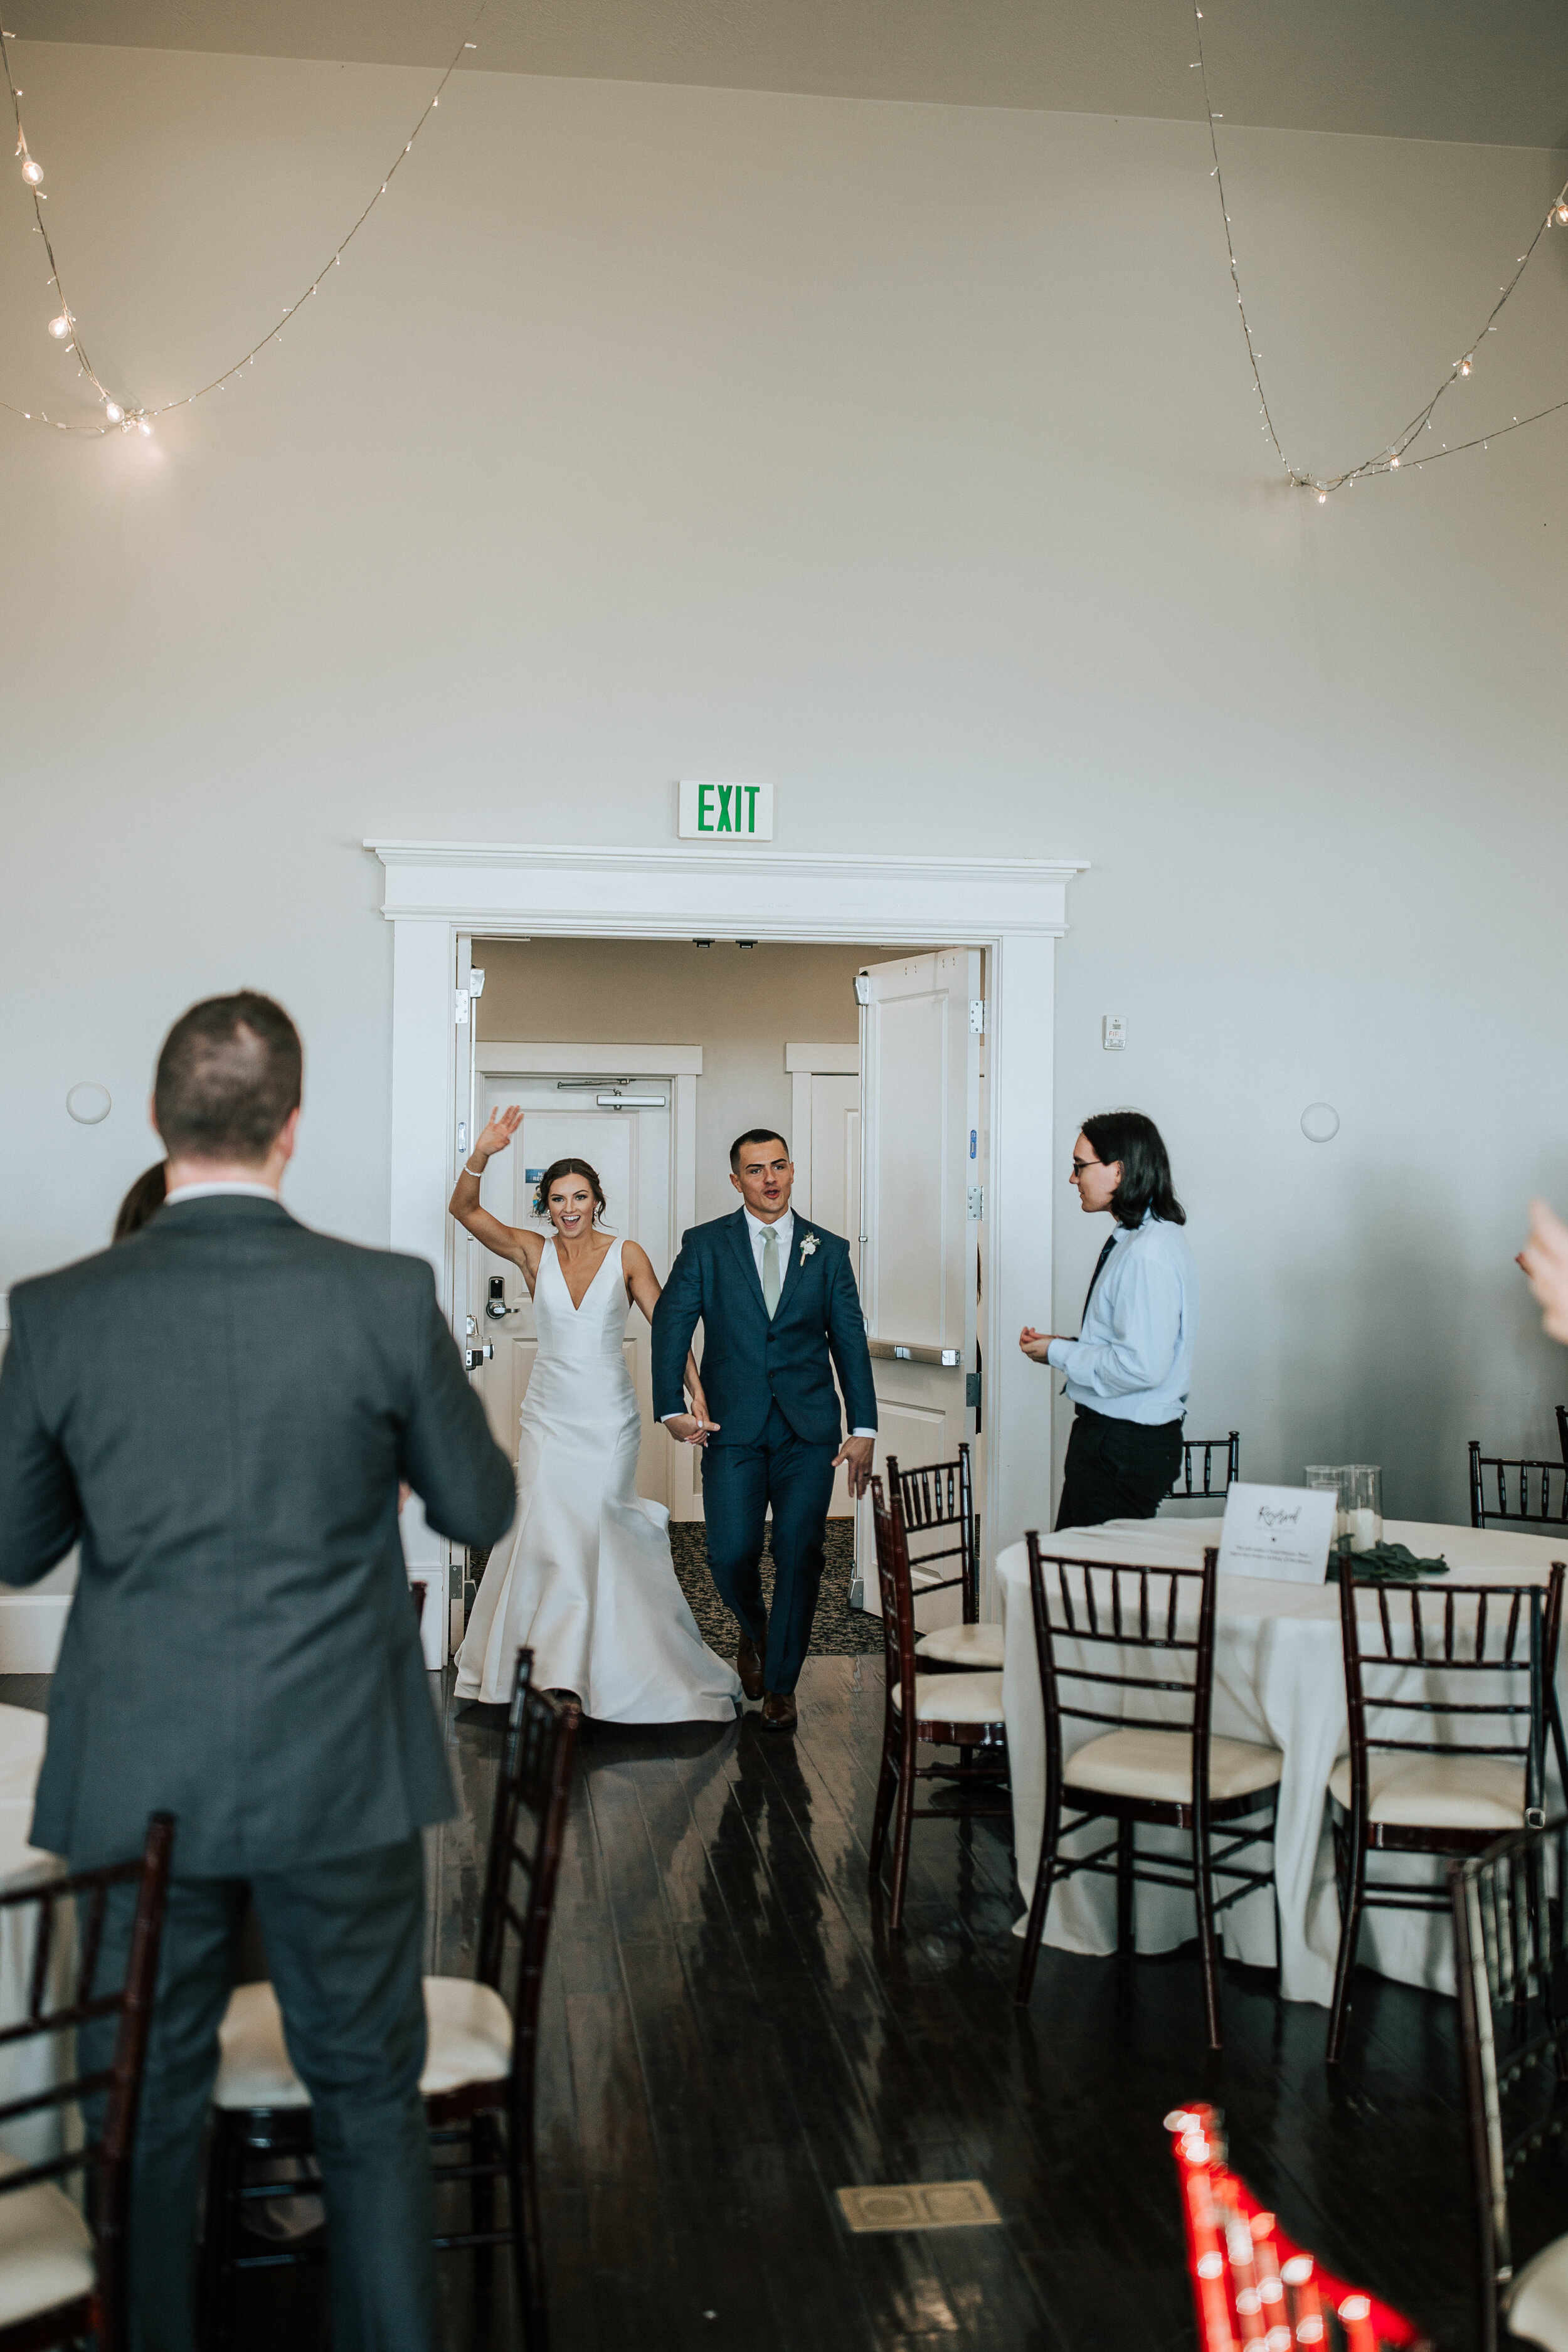  Bride and groom cheer as they enter the room at Sleepy Ridge Golf Course by wedding photographer Emily Jenkins Photography in Utah County. bride and groom enter room plunge neck wedding gown sleek dress #emilyjenkinsphotography #emilyjenkinsweddings